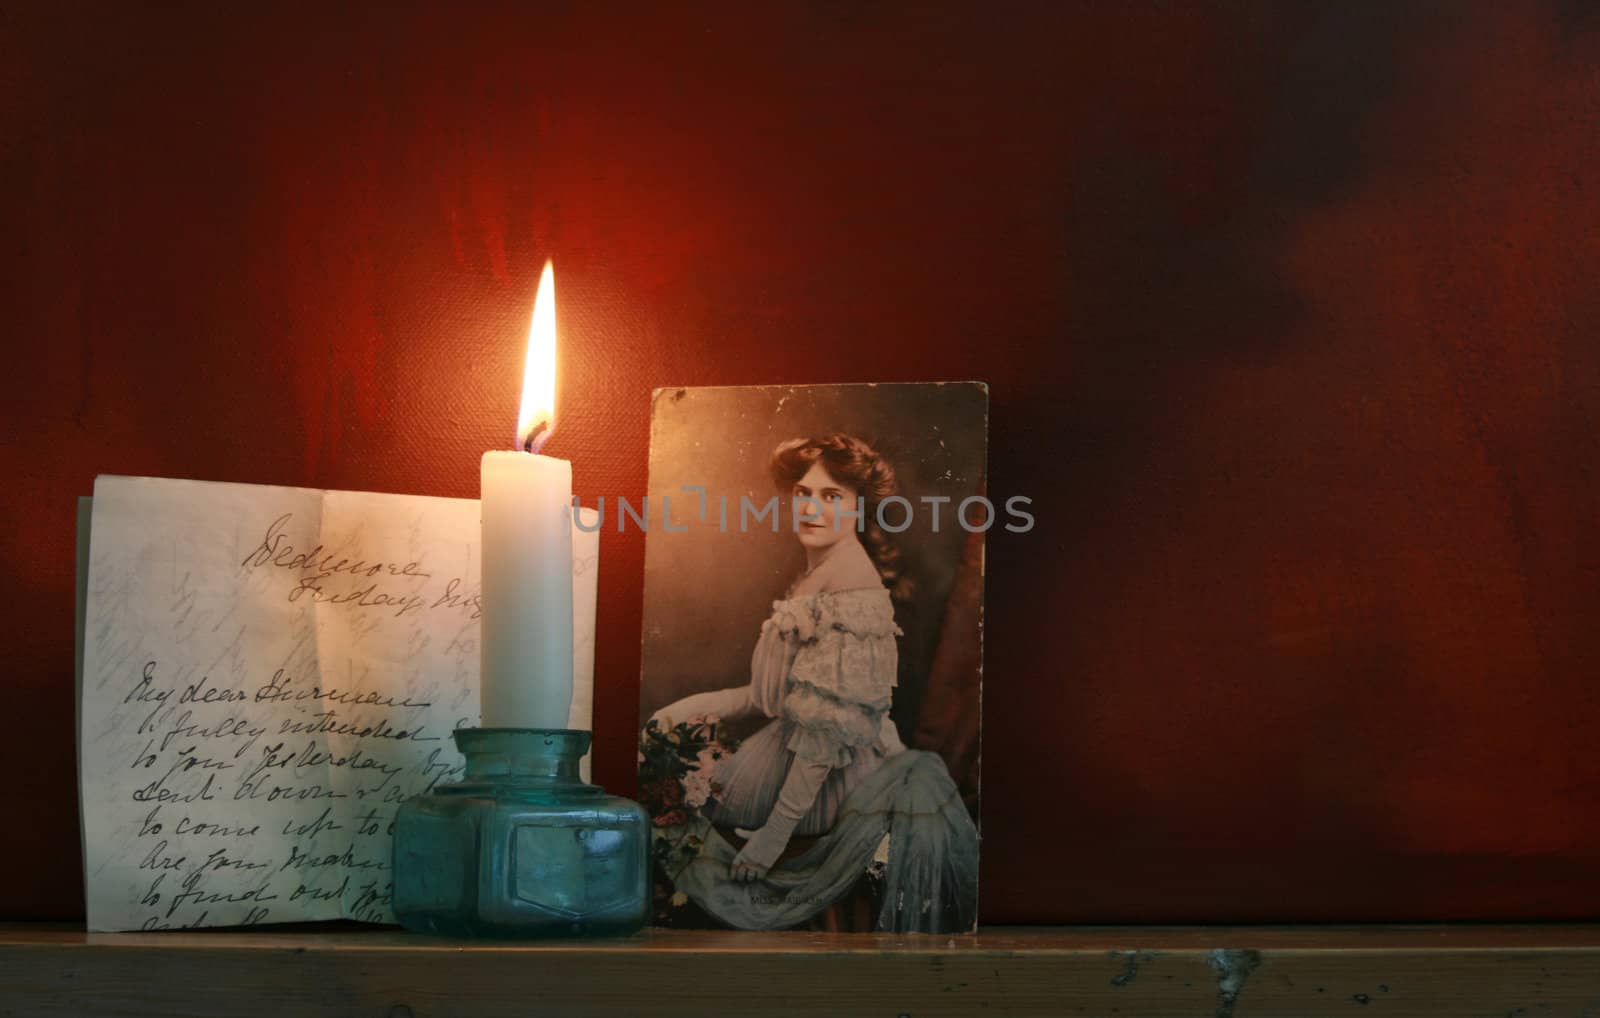 Victorian Love letters set top a mantle piece with a candle against a dark red grunge styled background. Mood evocative.